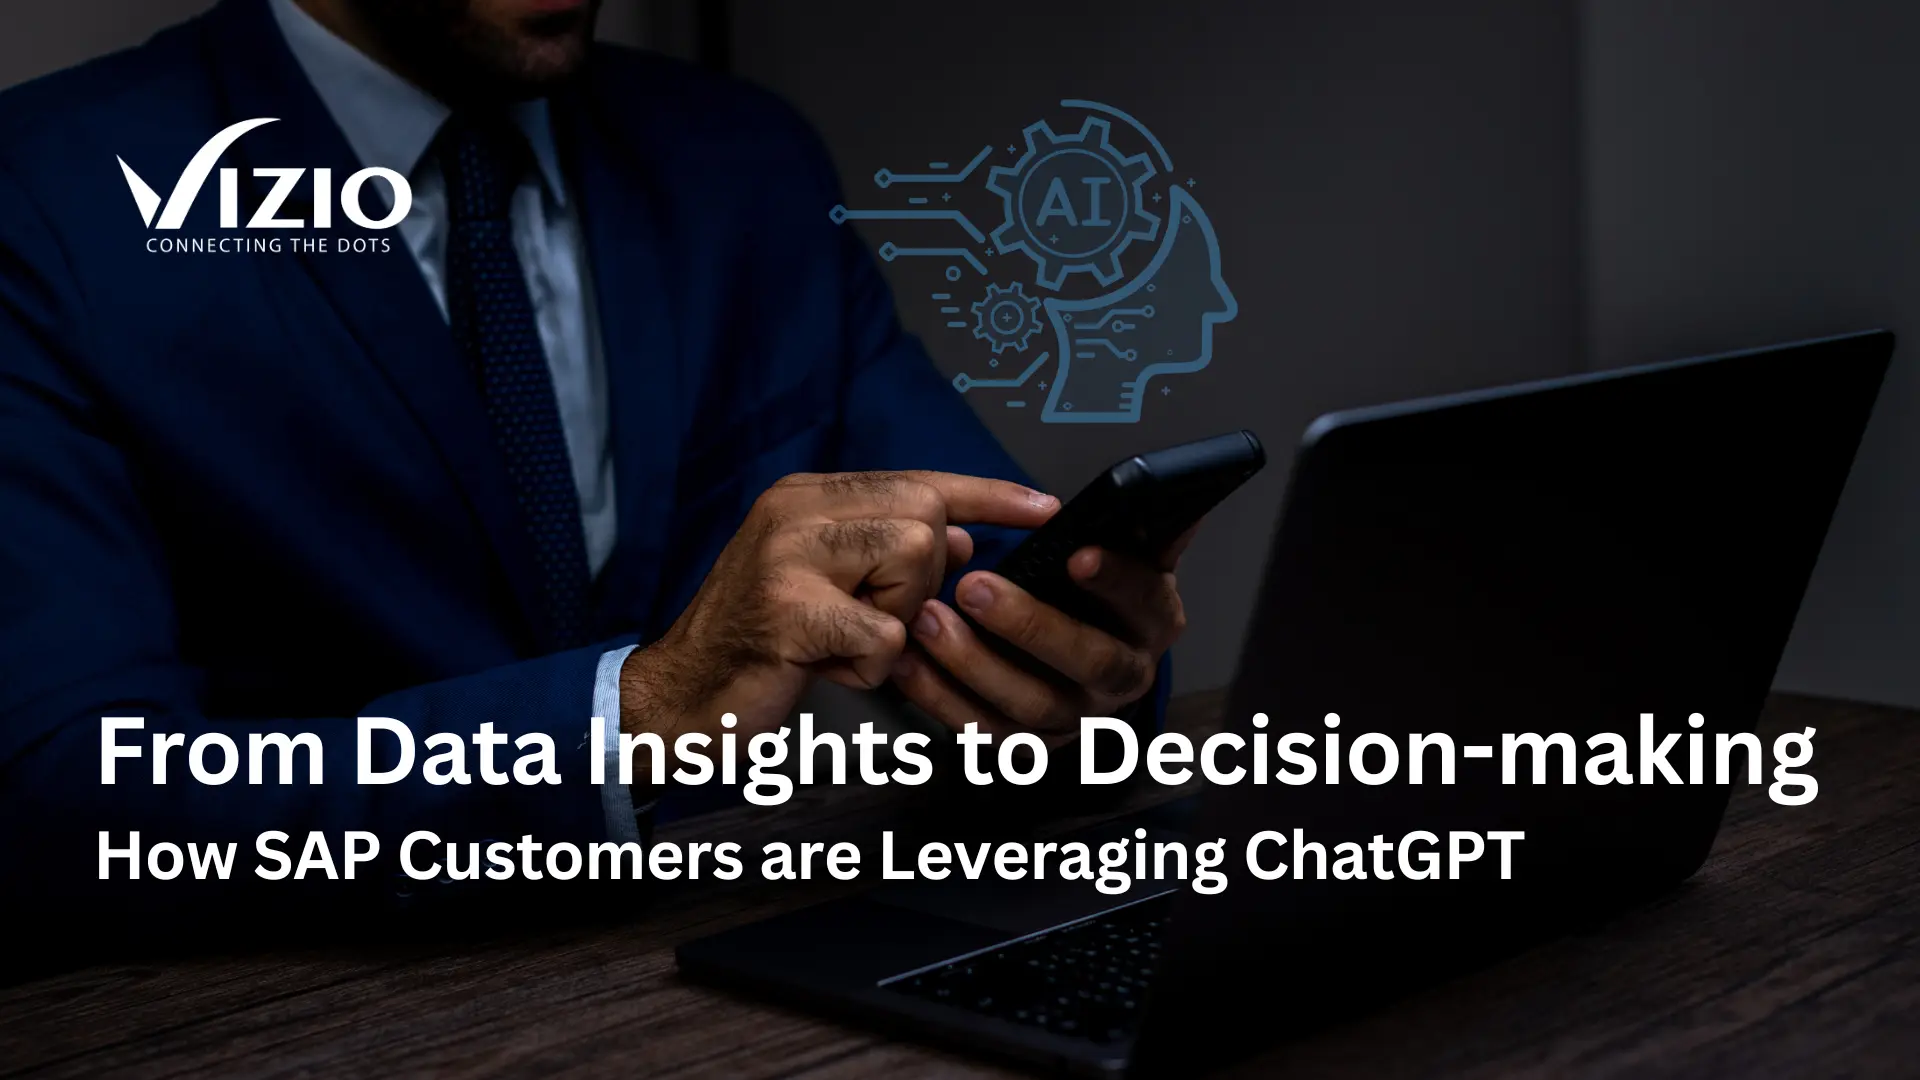 How SAP Customers are Leveraging ChatGPT